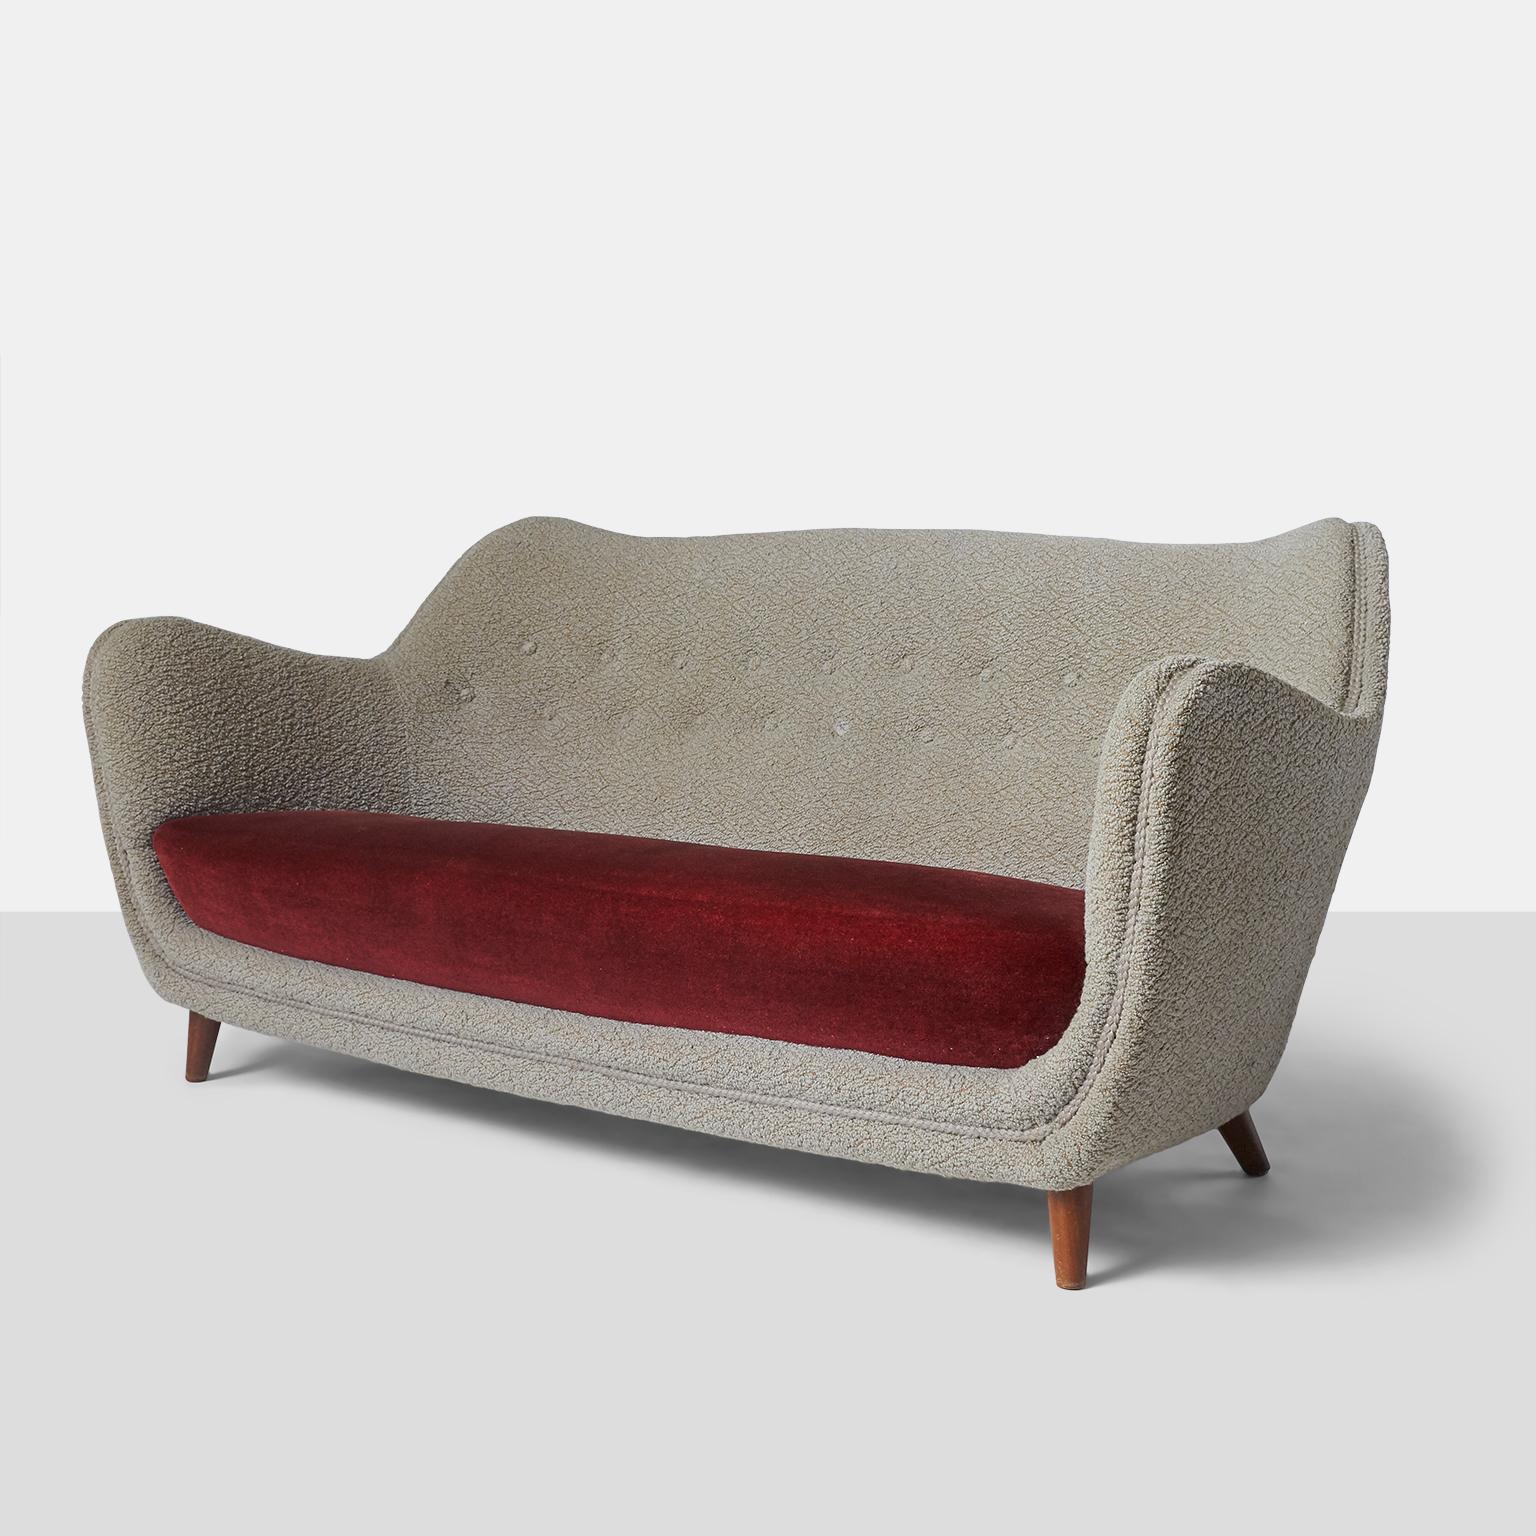 Sofa on walnut legs with red velvet bench seat and 1960s textured upholstery.